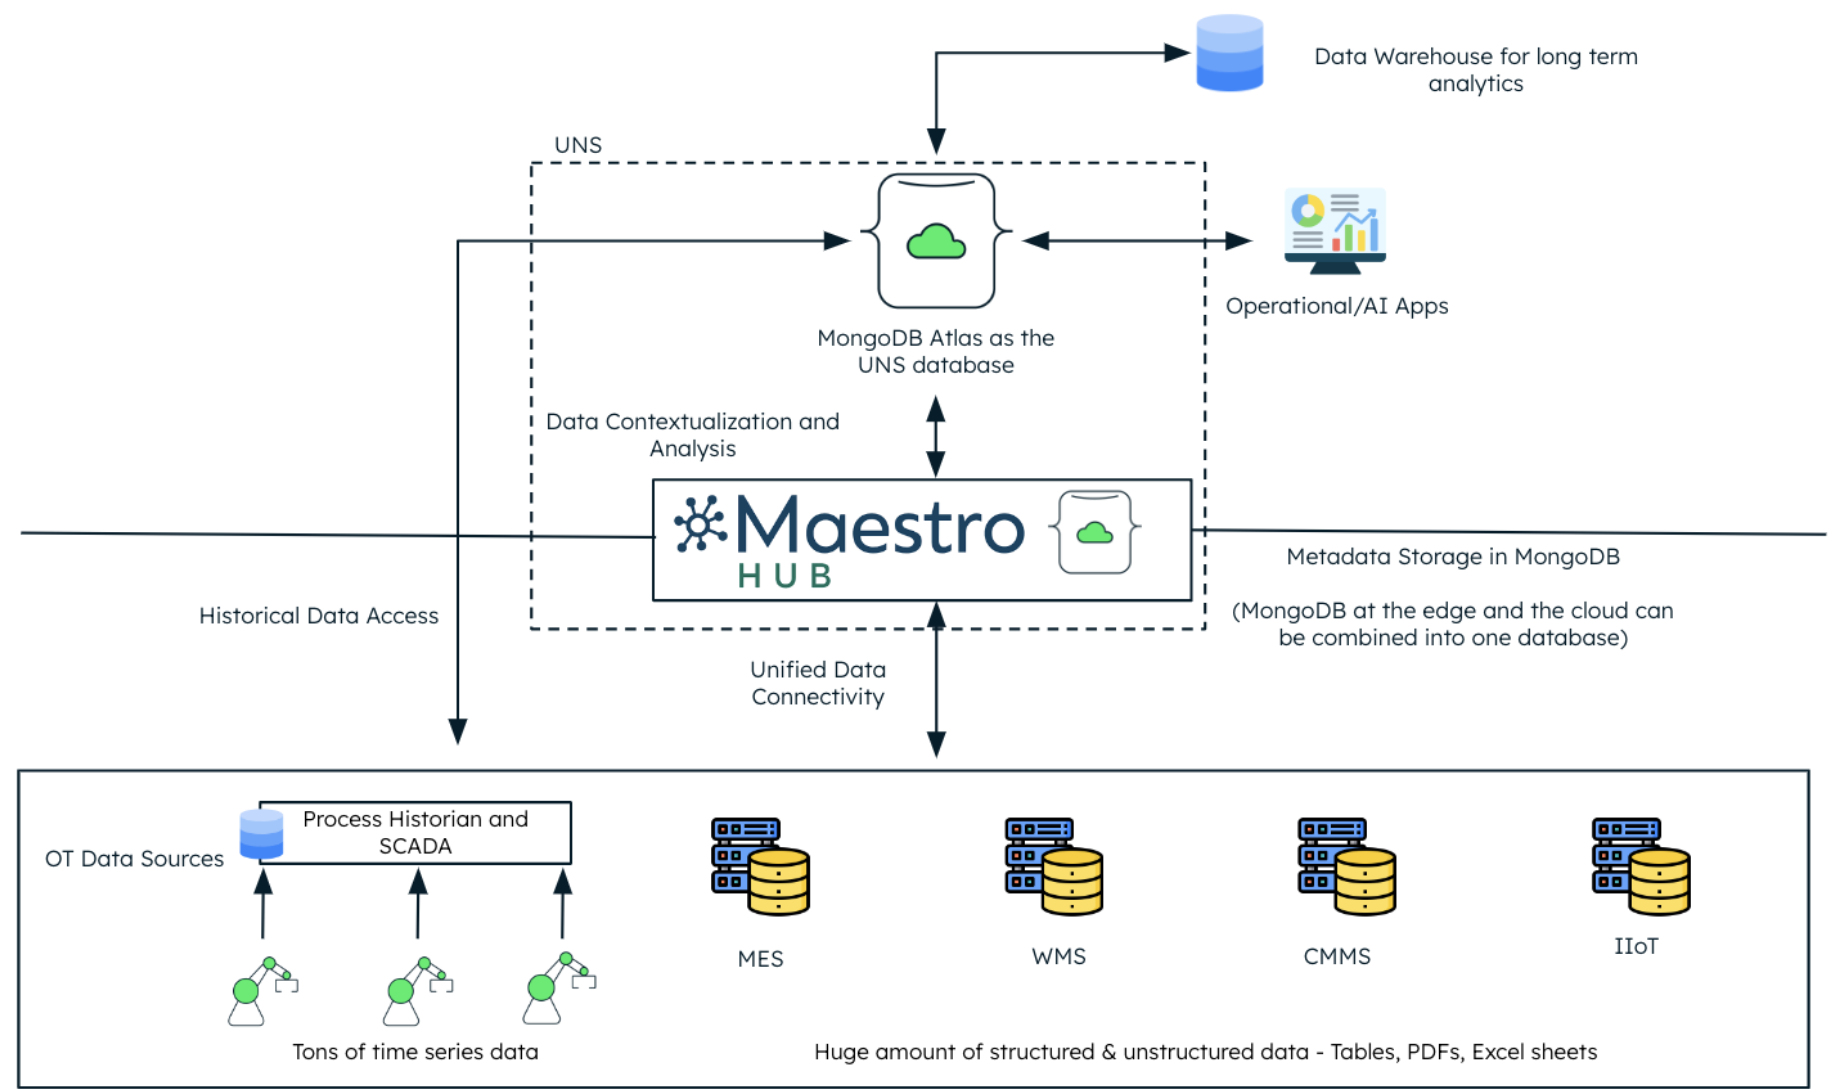 This diagram shows what the data architecture looks like when using MaestroHub and MongoDB together. MaestroHub acts as the Unified Namespace, controlling the data sent and utilized by applications, while MongoDB Atlas serves as the UNS database.